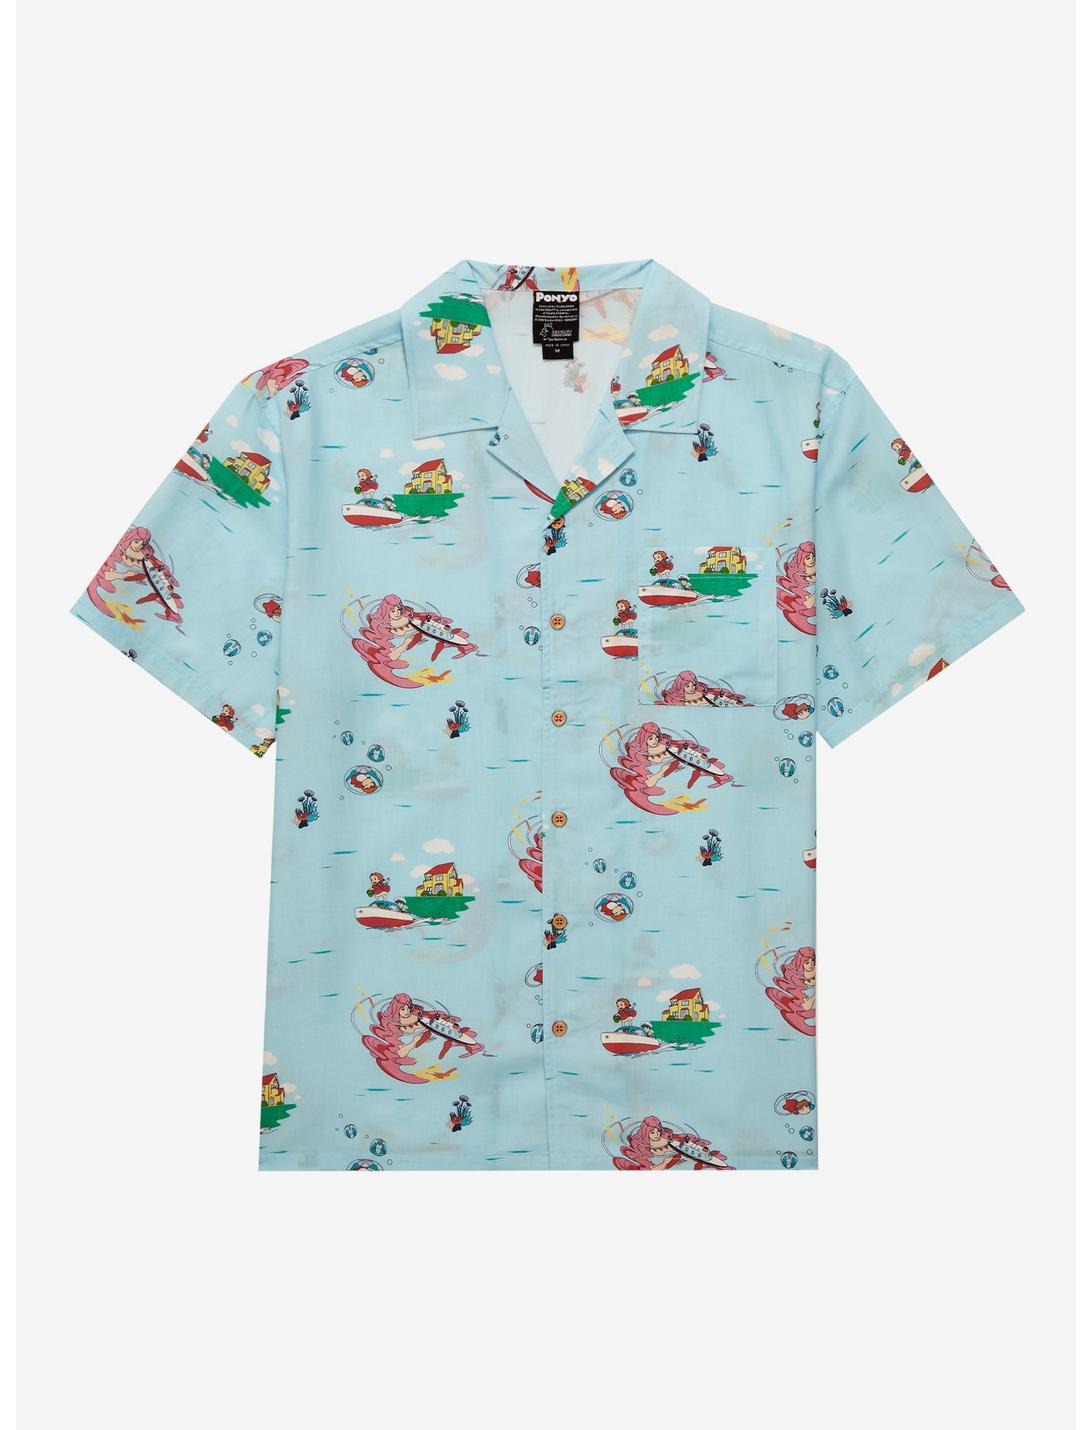 Studio Ghibli Ponyo Allover Print Woven Button-Up - BoxLunch Exclusive, LIGHT BLUE, hi-res